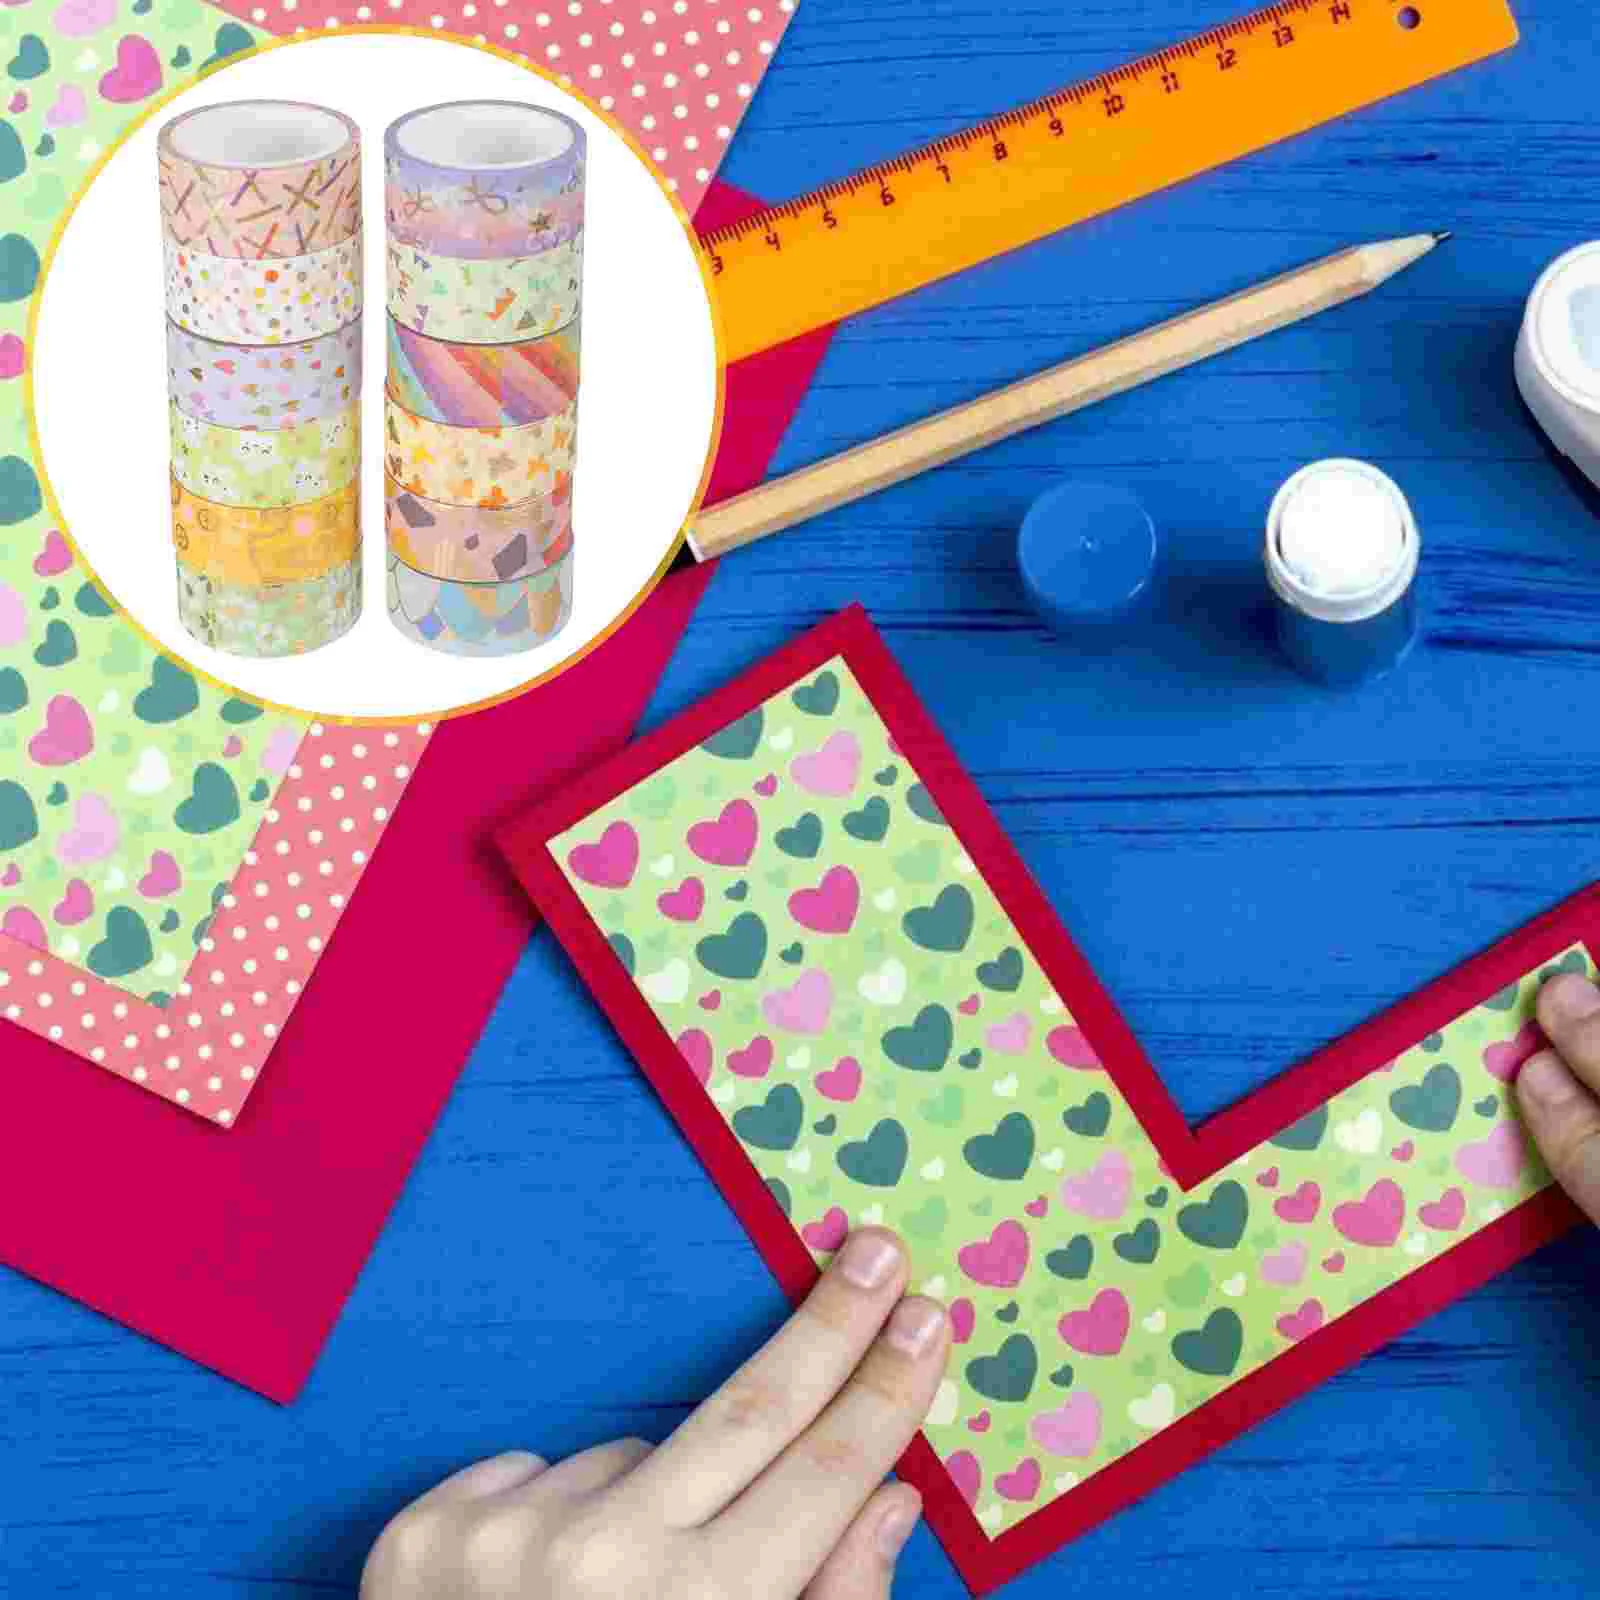 

Tape Washidiy Paper Account Decorative Hand Masking Sticker Tool Craft Supplies Sticky Glitter Tapes Floral Organizer Diary Cute